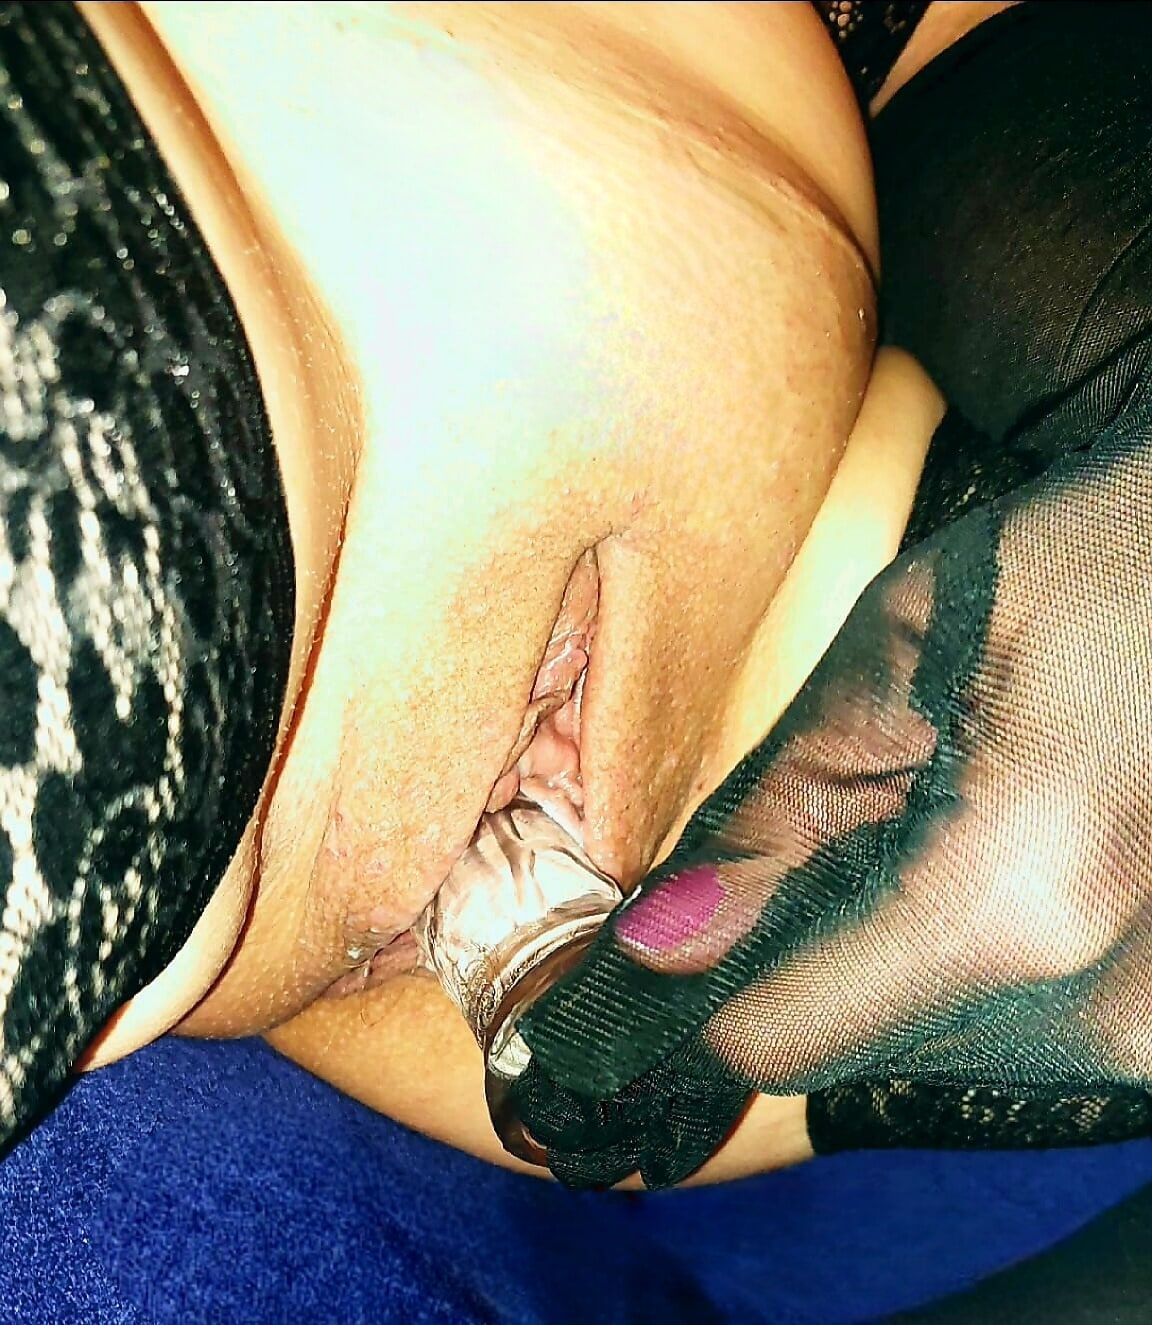 My pussy is leaking #30